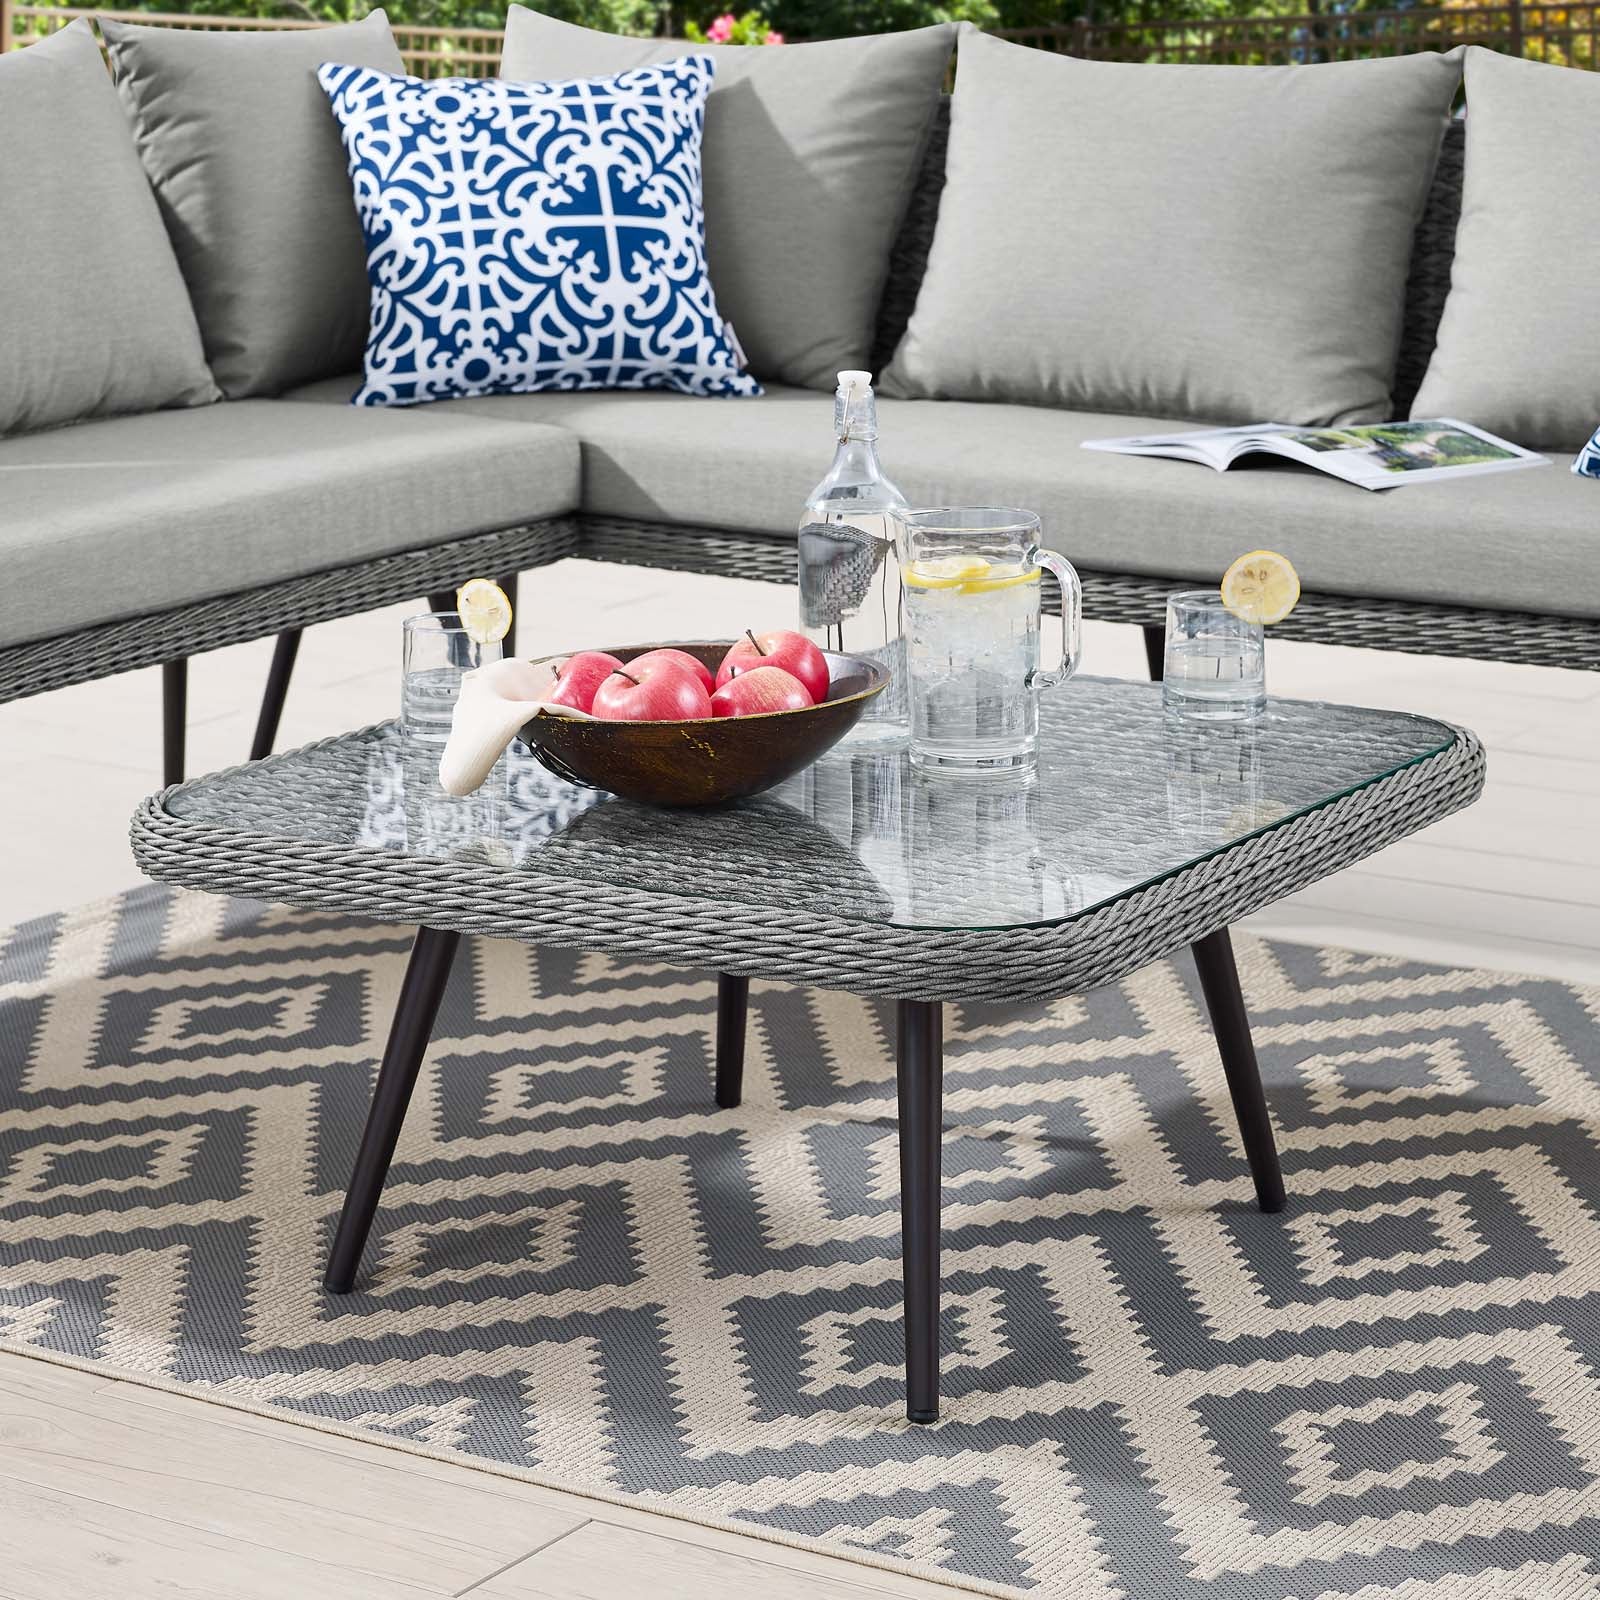 Endeavor Outdoor Patio Wicker Rattan Square Coffee Table - East Shore Modern Home Furnishings